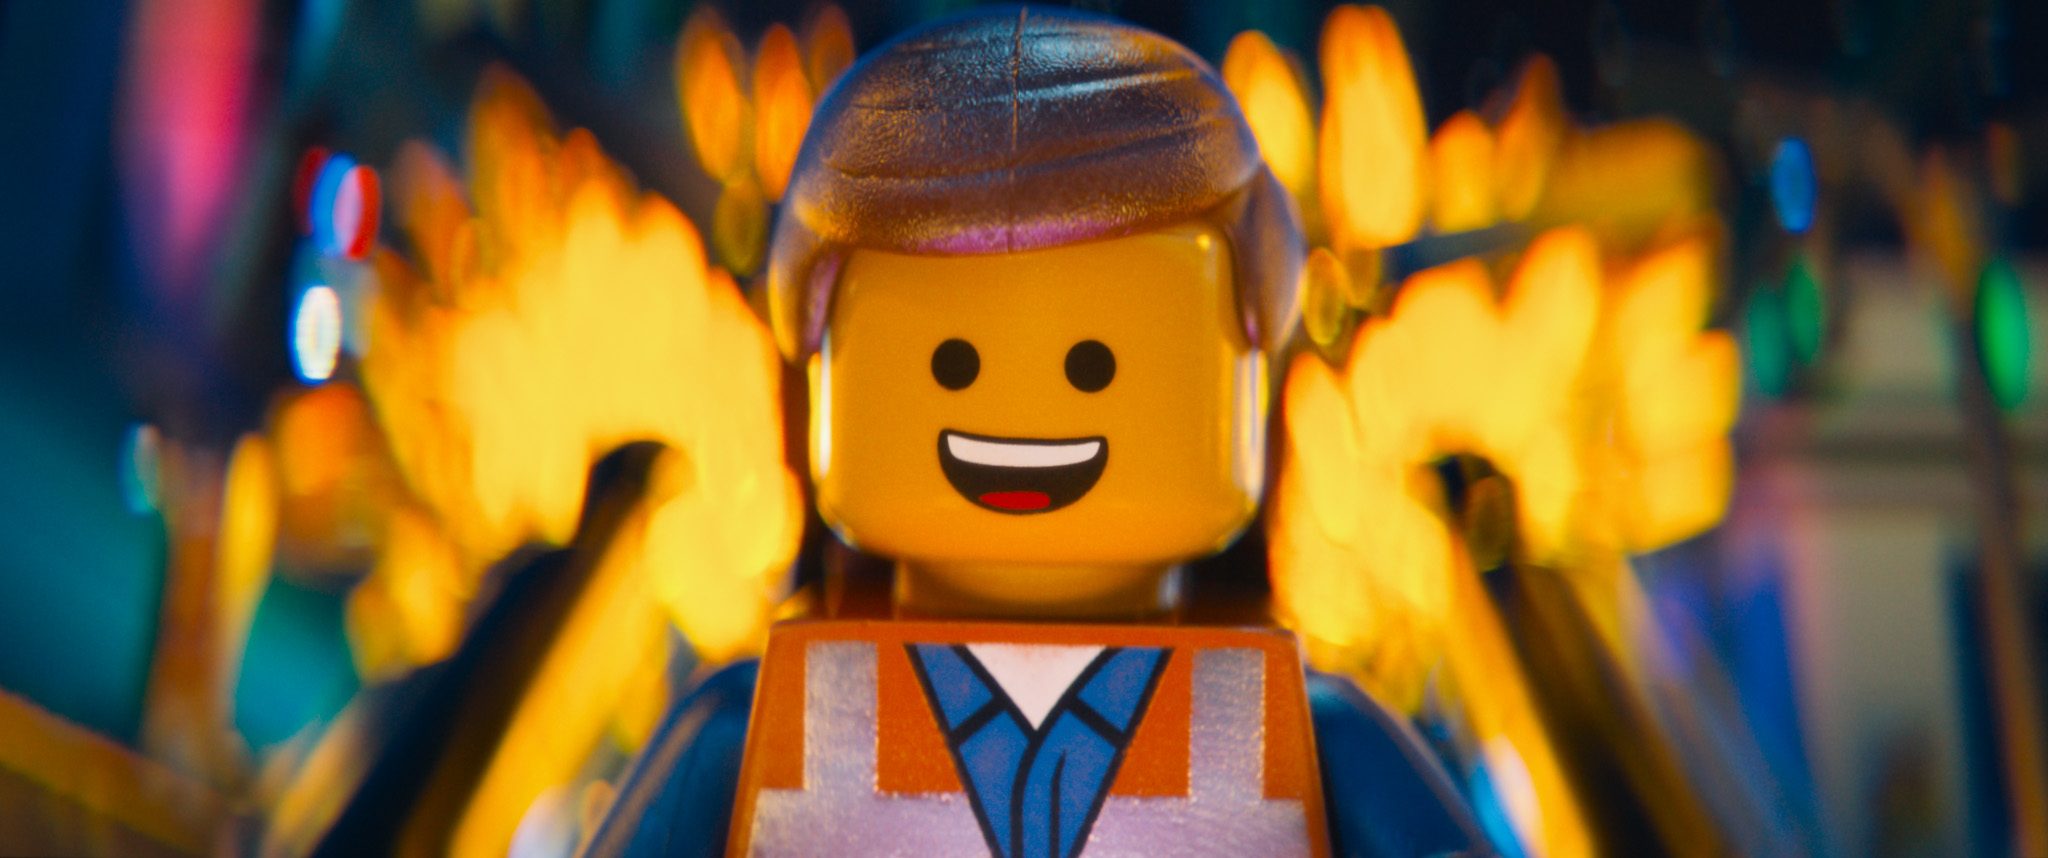 ‘The LEGO Movie 2: The Second Part’ Teaser Trailer